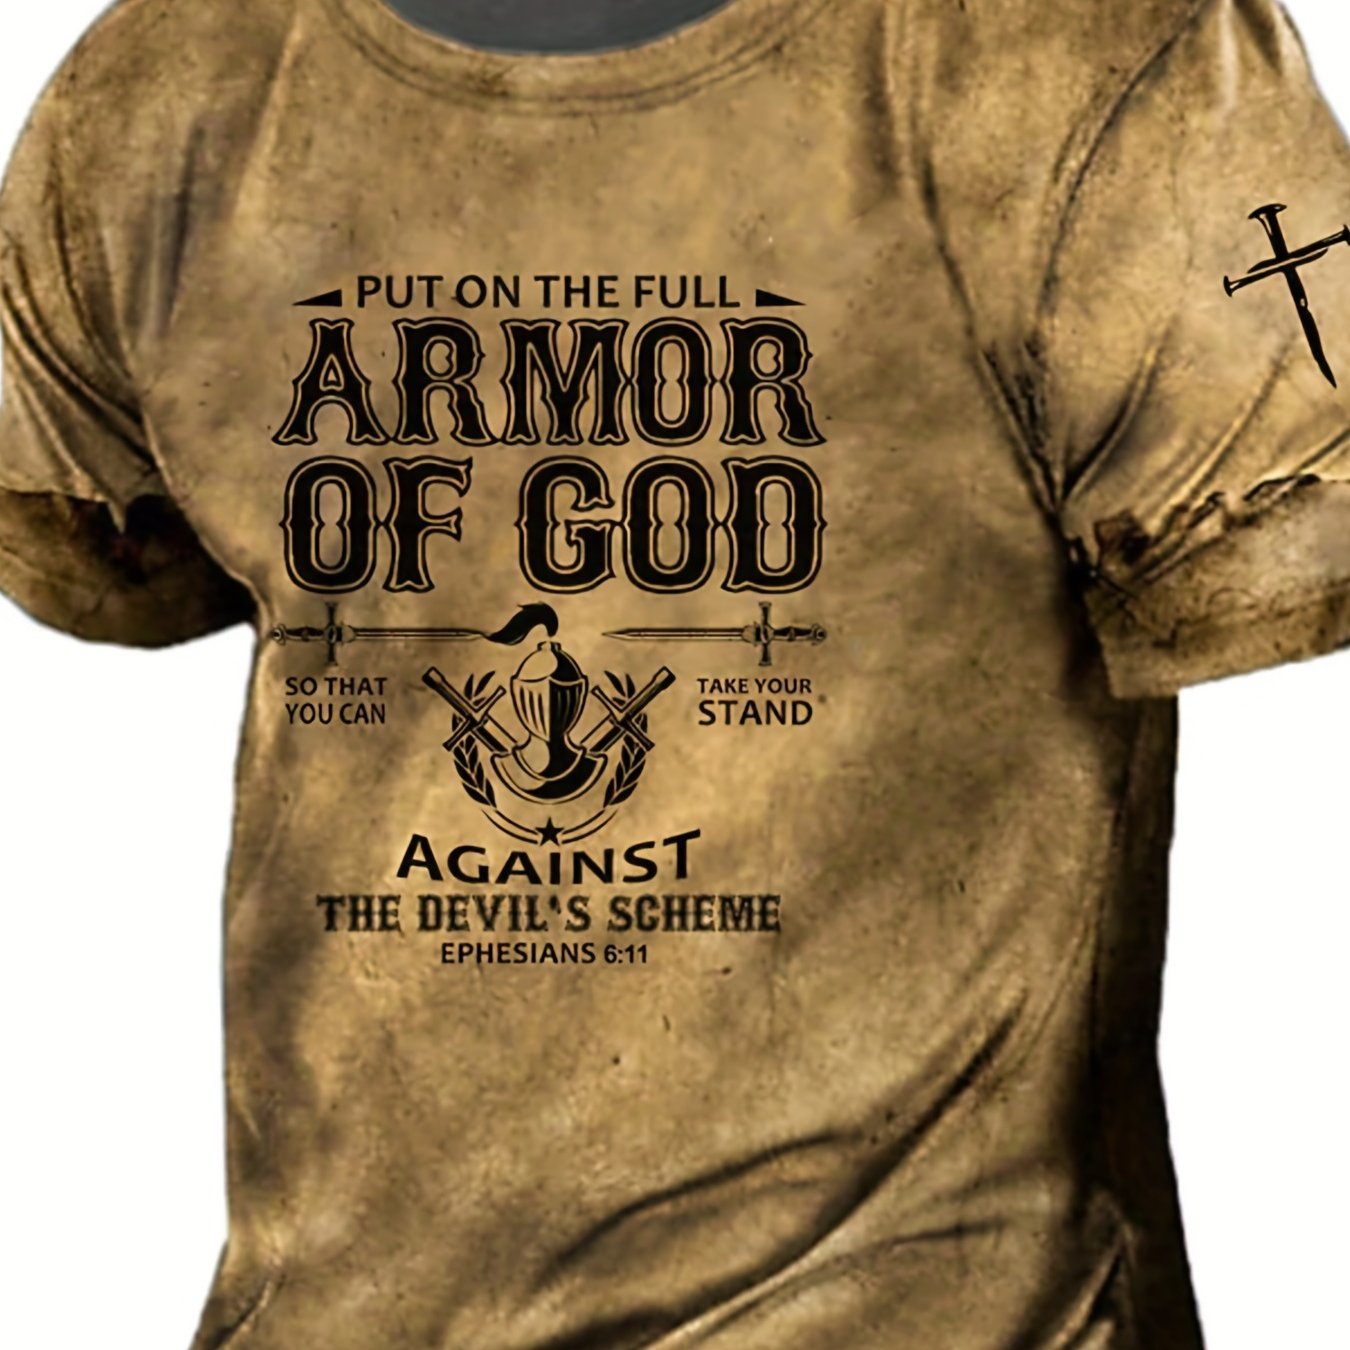 Men's Armor of God 3D Printed Tee - Creative Design, Comfortable Stretch Fabric, Perfect for Summer Outdoor Activities